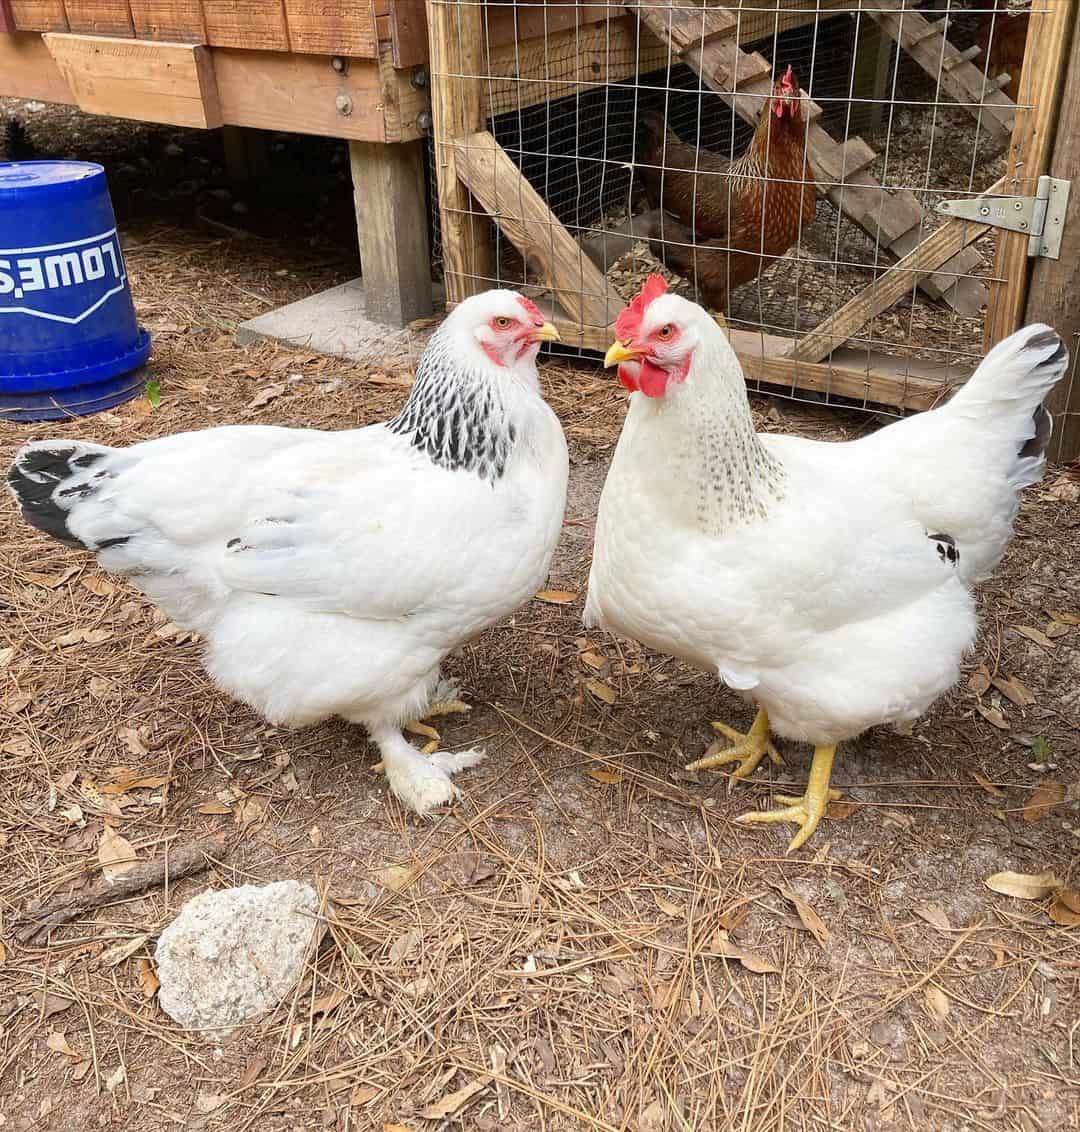 How do you care for your Delaware chickens?